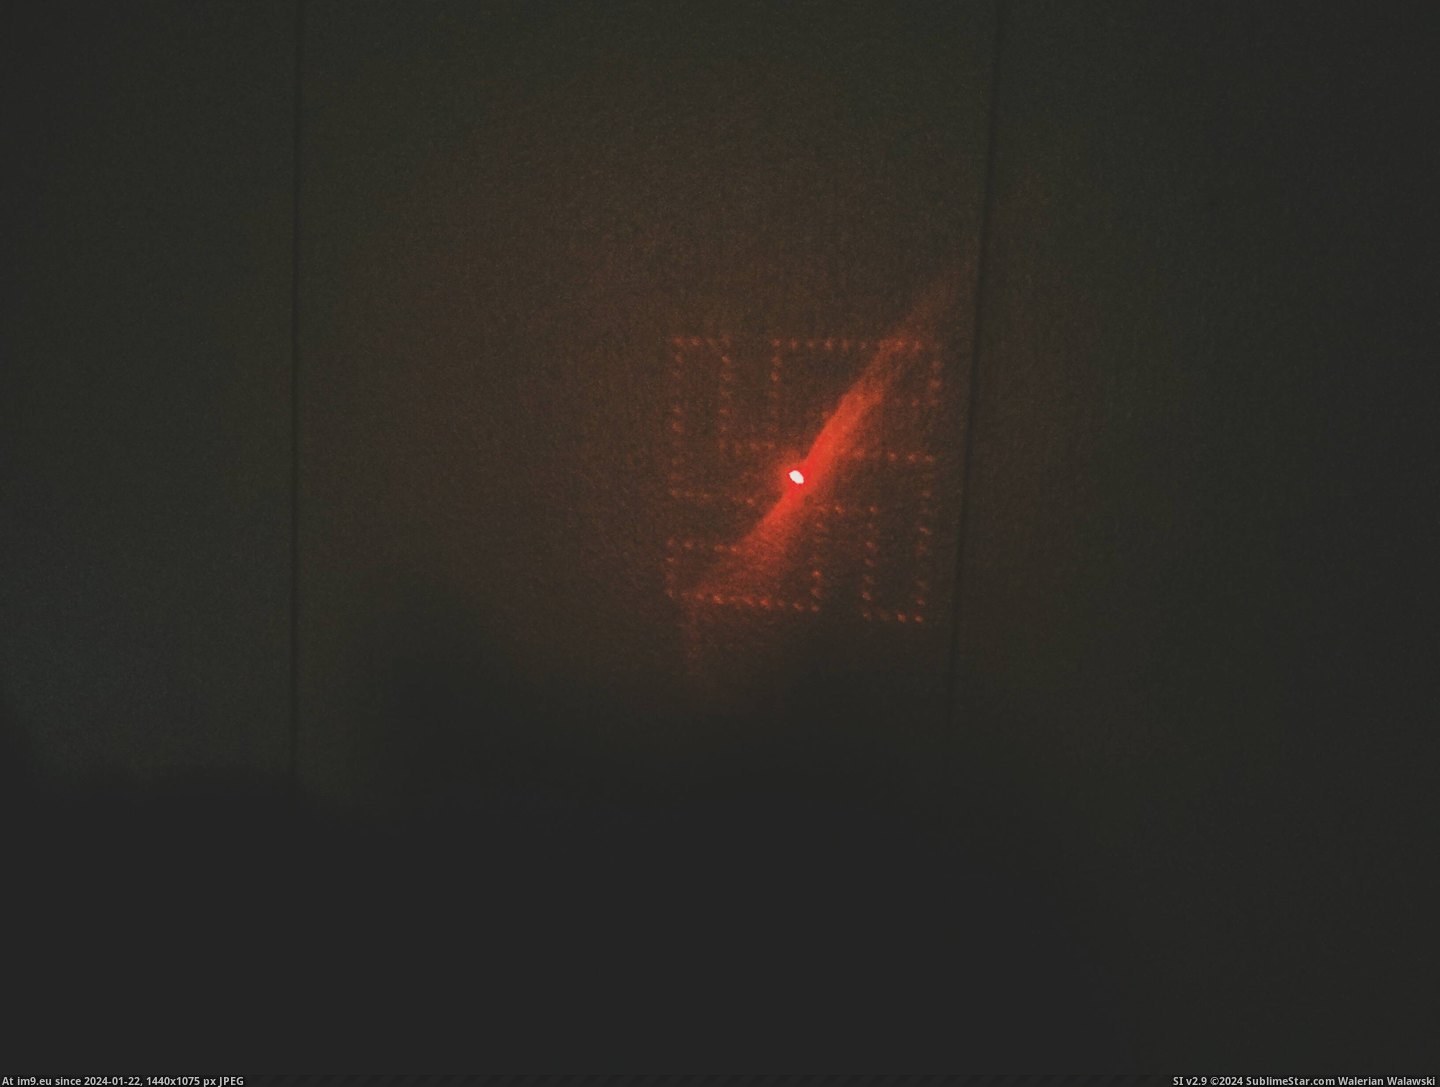 #Wtf #Cat #Store #Surprise #Laser #Projected #Pointer #Wall #Dollar #Imagine [Wtf] Imagine me and my cat's surprise when the dollar store laser pointer projected this on the wall... Pic. (Изображение из альбом My r/WTF favs))